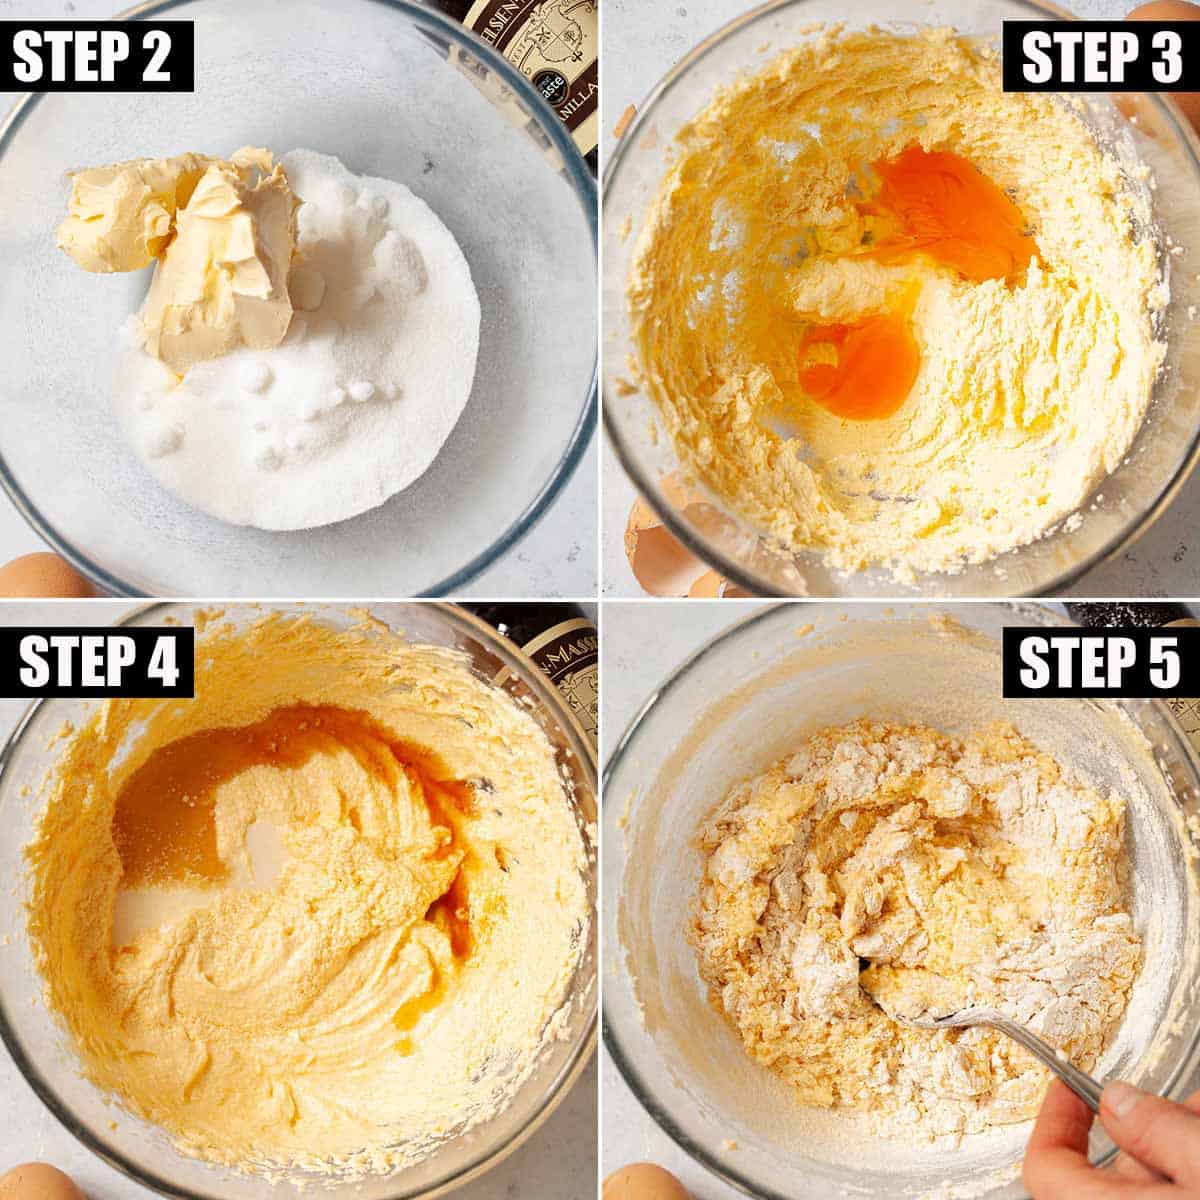 Collage of images showing sponge cake batter being made.